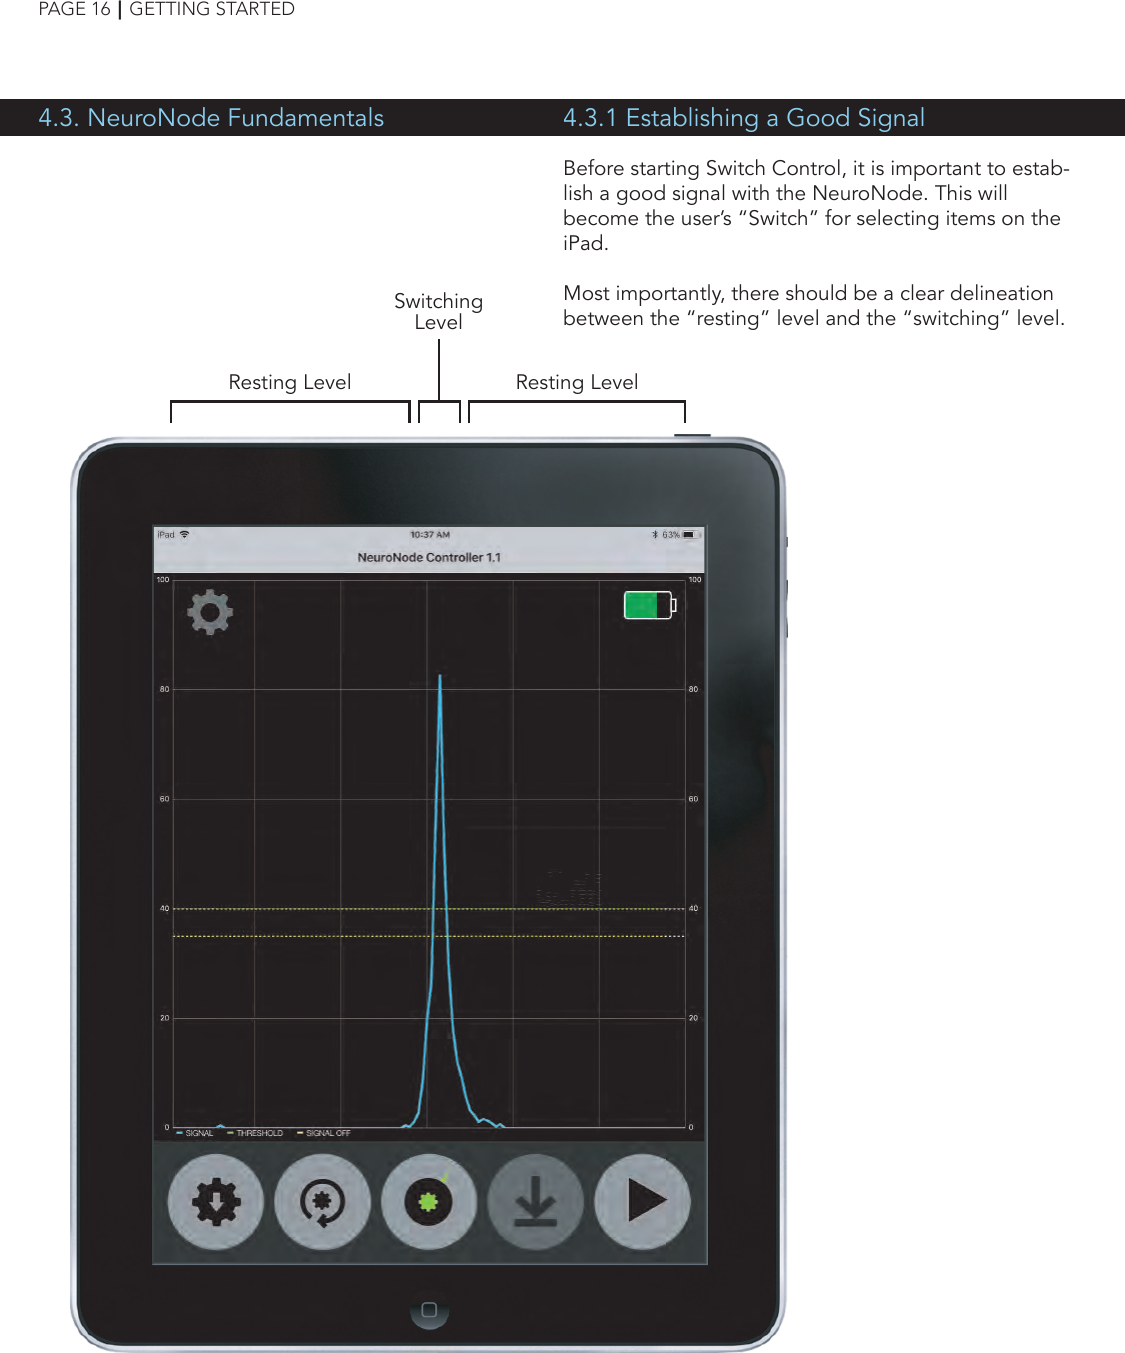 Before starting Switch Control, it is important to estab-lish a good signal with the NeuroNode. This will become the user’s “Switch” for selecting items on the iPad. Most importantly, there should be a clear delineation between the “resting” level and the “switching” level.PAGE 16┃GETTING STARTED4.3. NeuroNode Fundamentals 4.3.1 Establishing a Good SignalResting Level Resting LevelSwitchingLevel